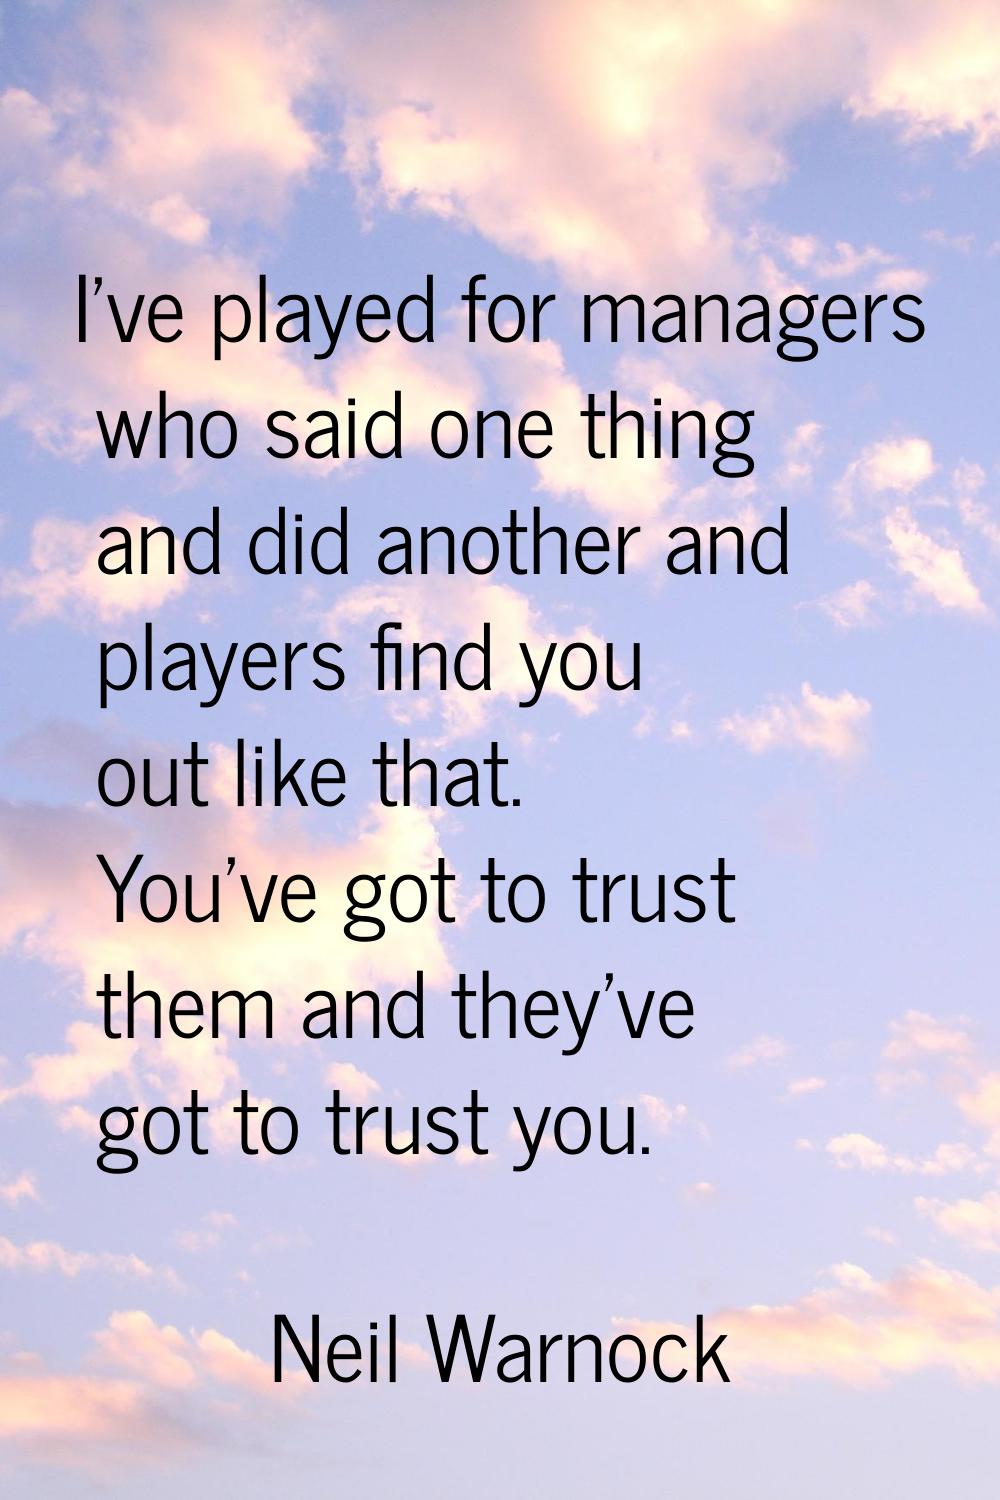 I've played for managers who said one thing and did another and players find you out like that. You